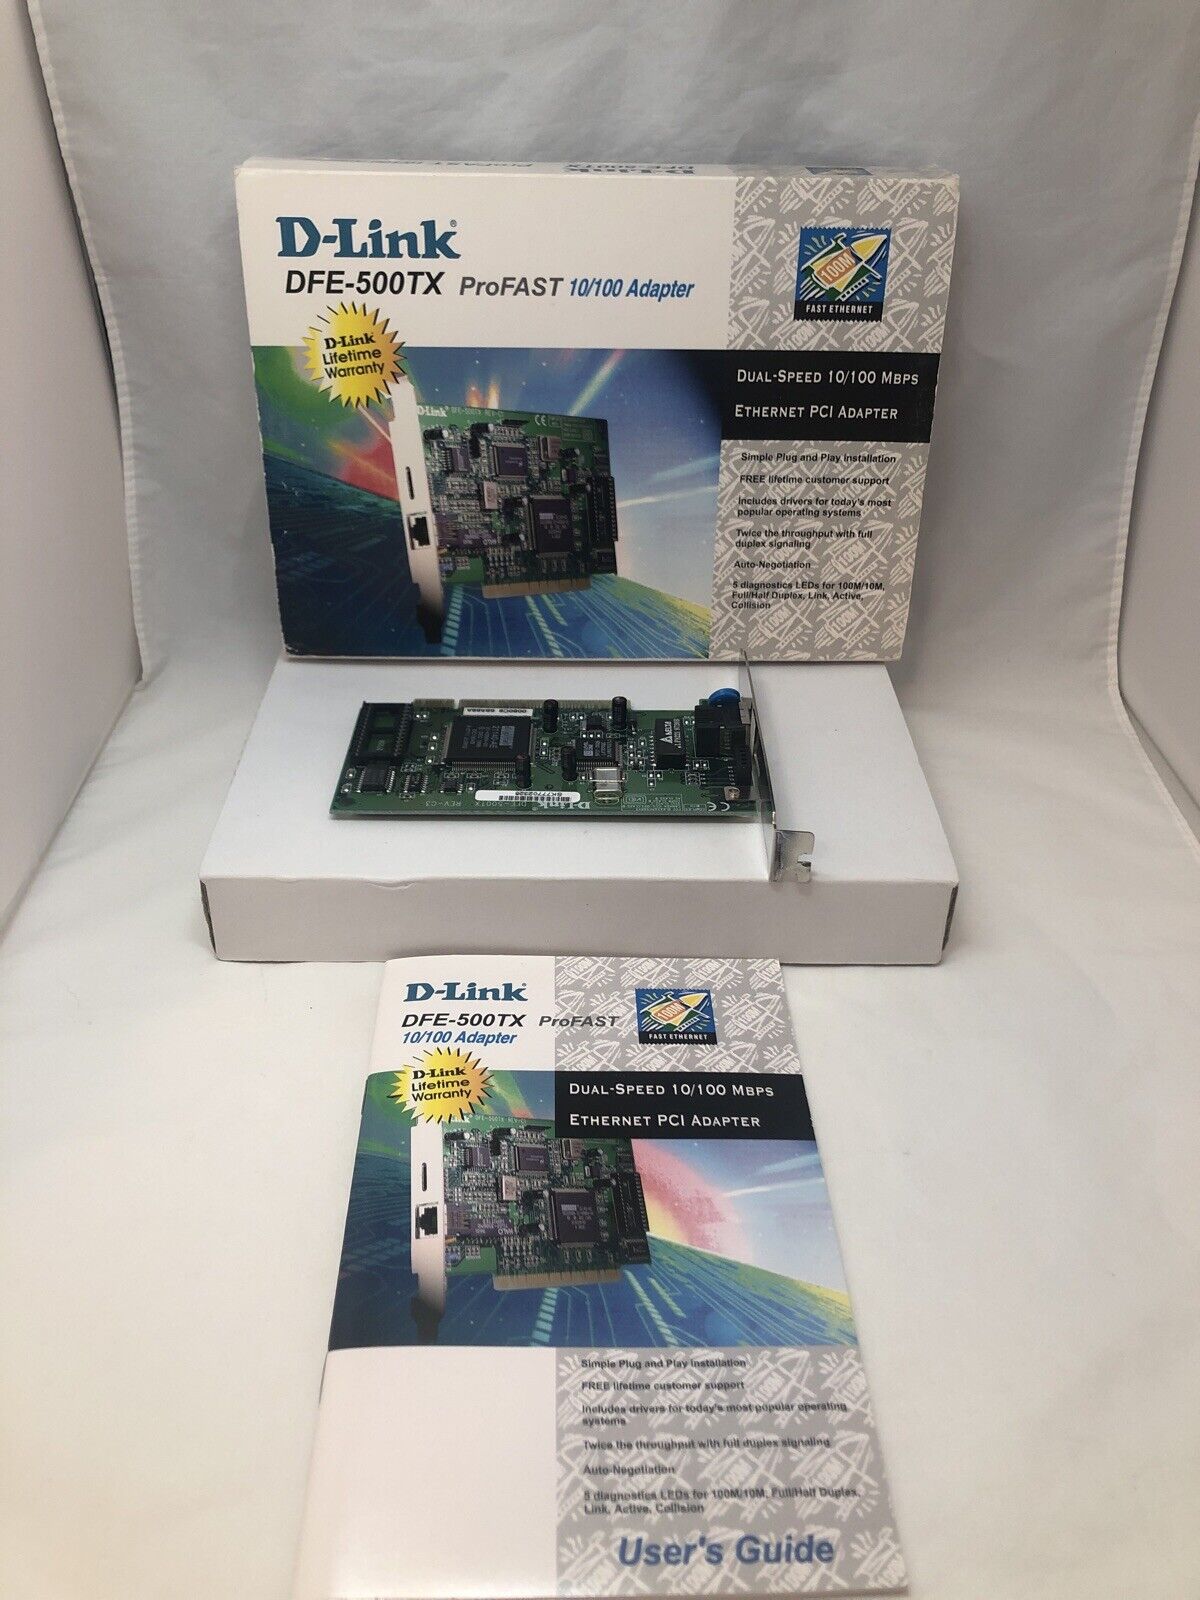 D-LINK DFE-500TX PROFAST 10/100 DUAL-SPEED ETHERNET PCI ADAPTER TESTED WORKING